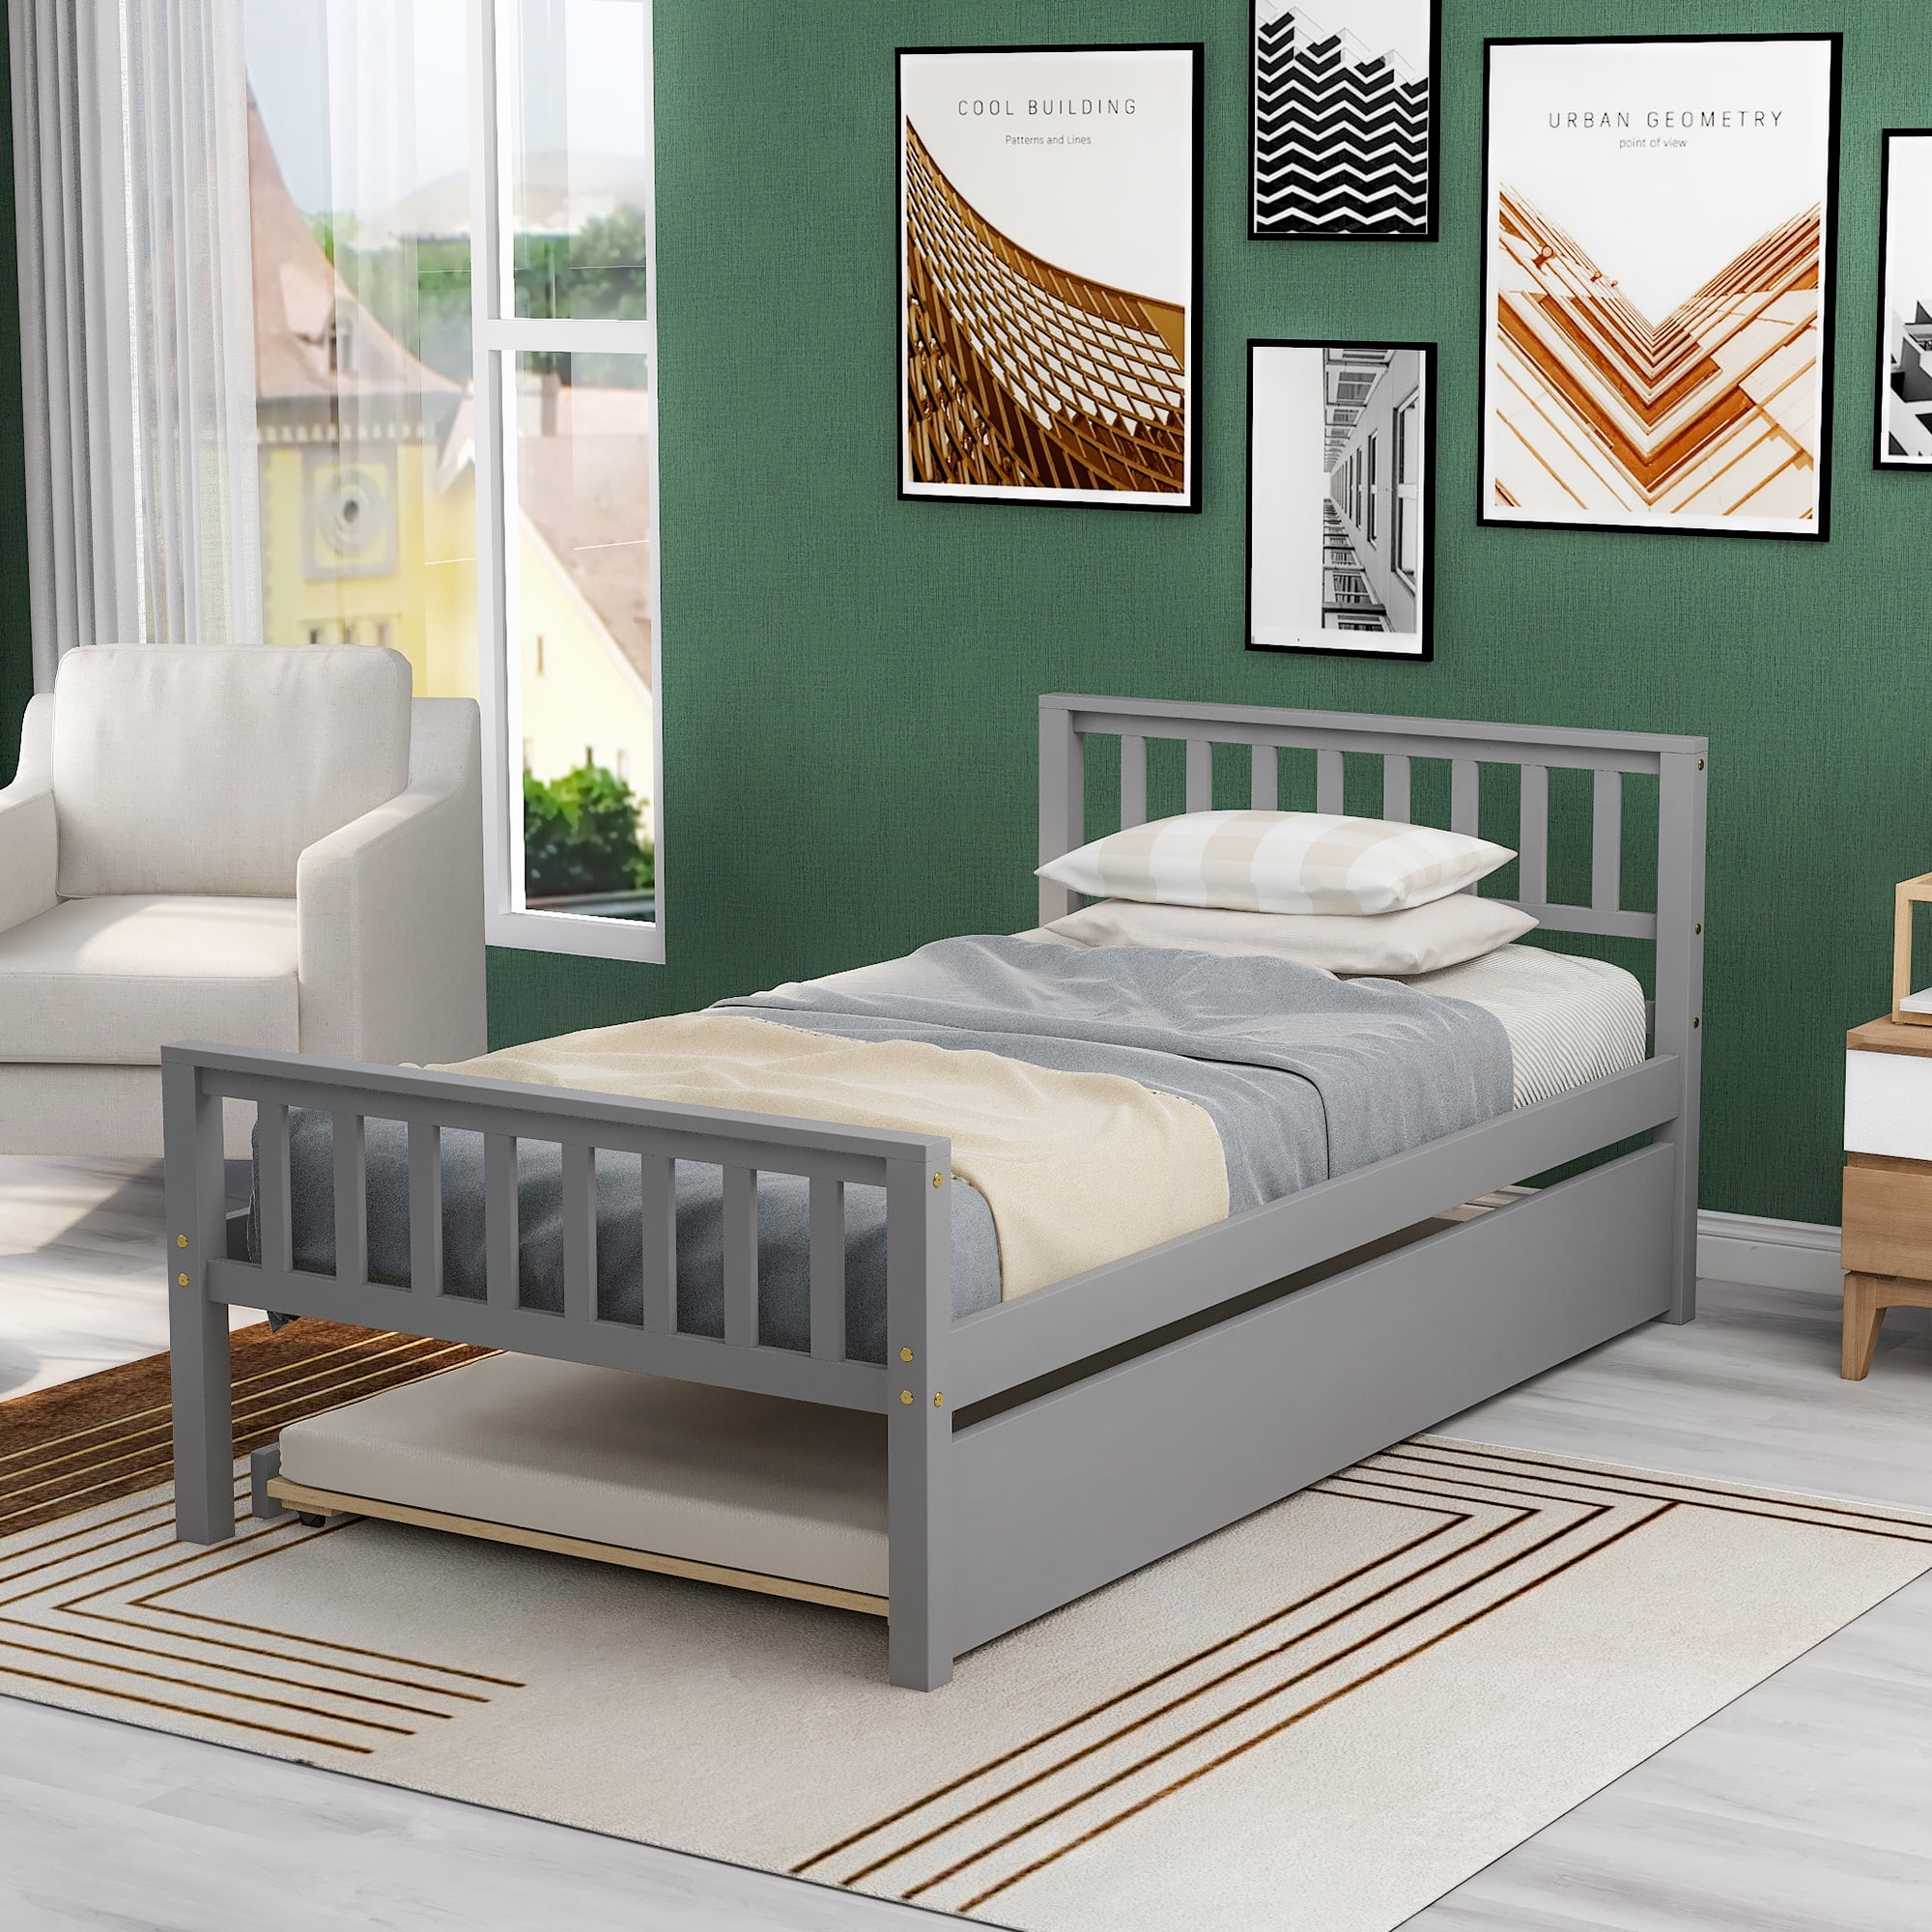 Gray Bed Frame Wooden Twin Platform, Make A Couch Out Of Twin Bed Frame